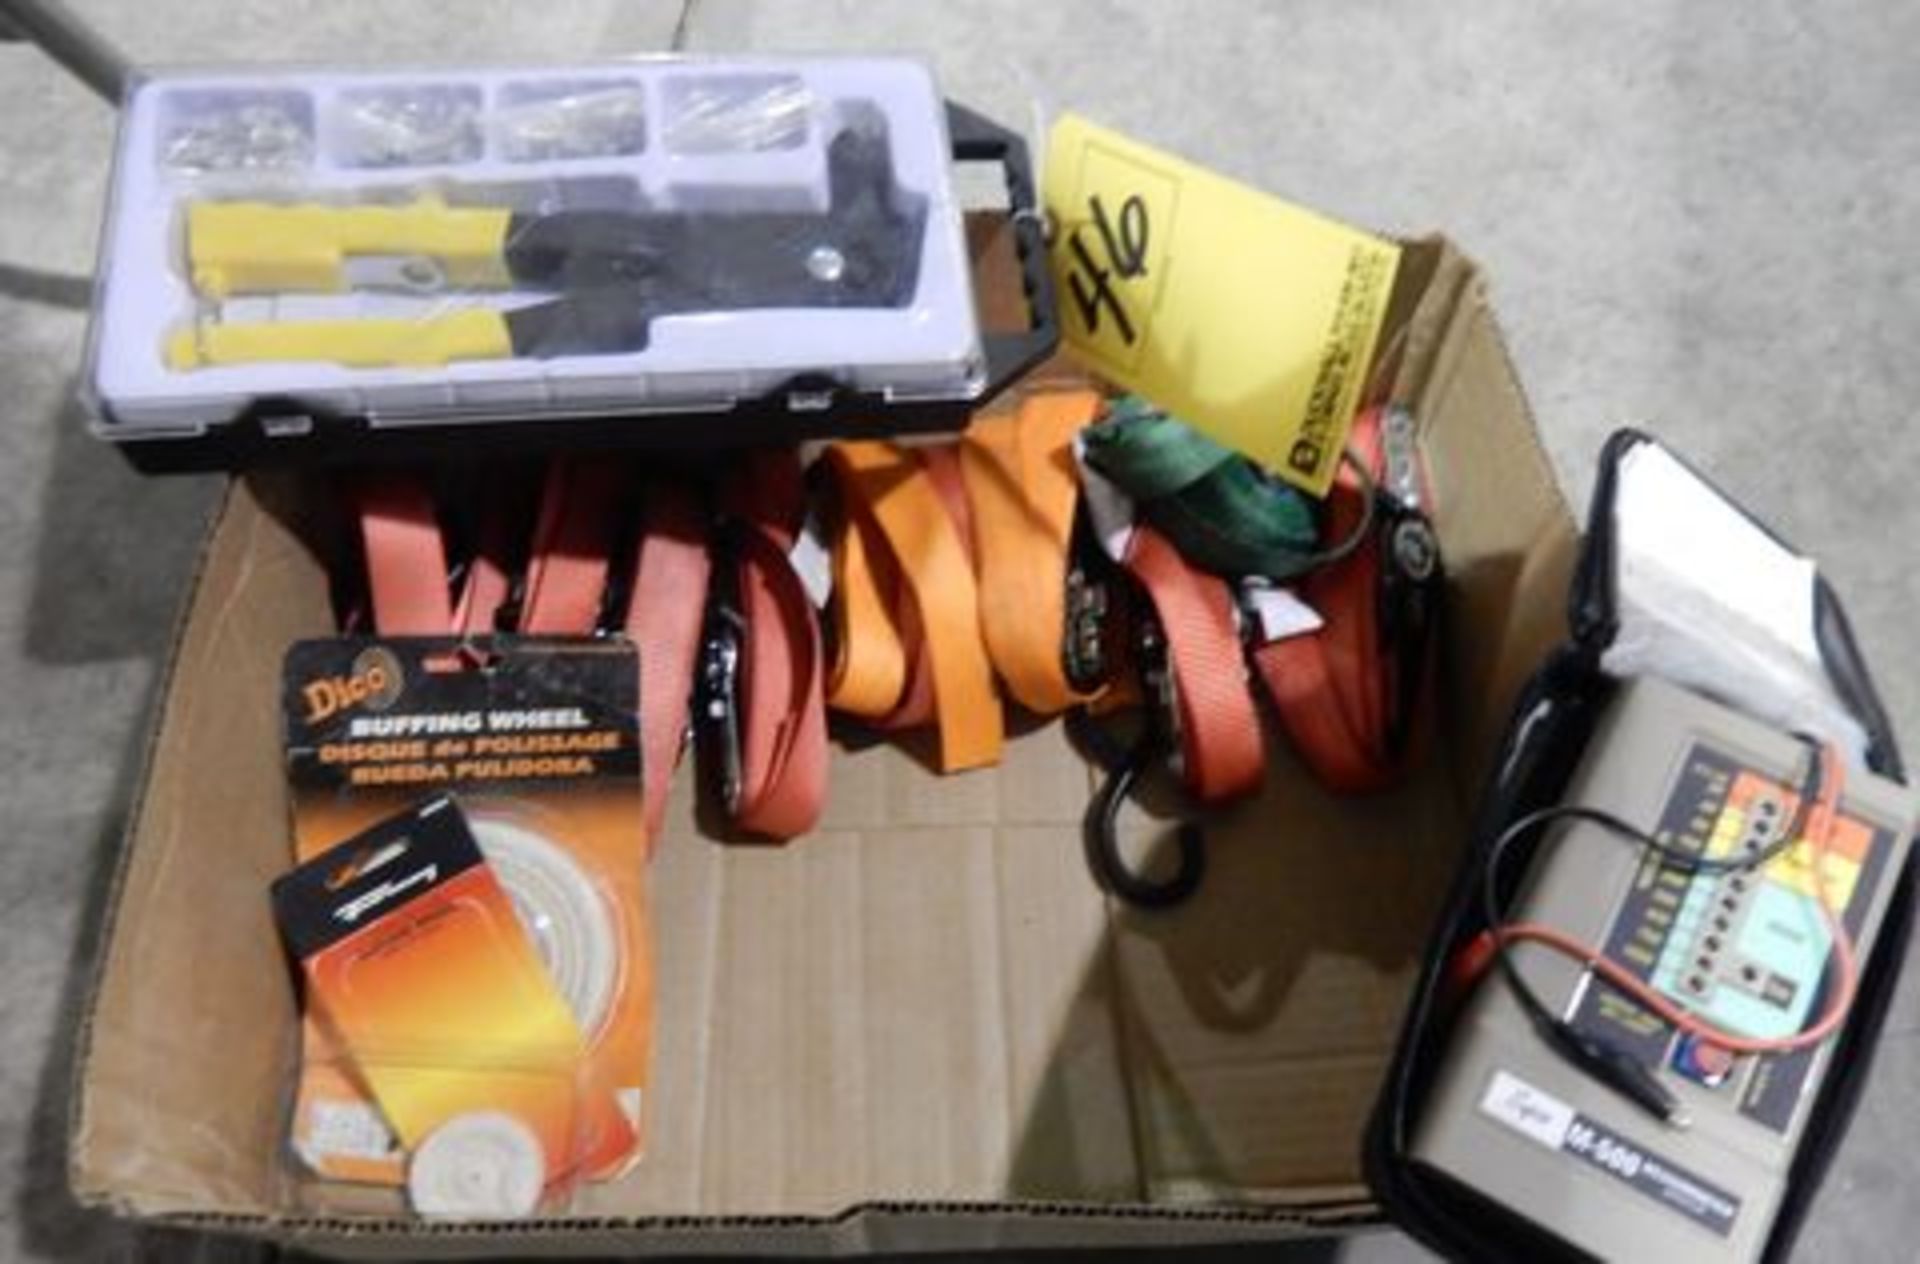 LOT MISC. TO INCLUDE CARGO STRAPS, HAND RIVETER, ELECTRICAL TESTER, ETC.